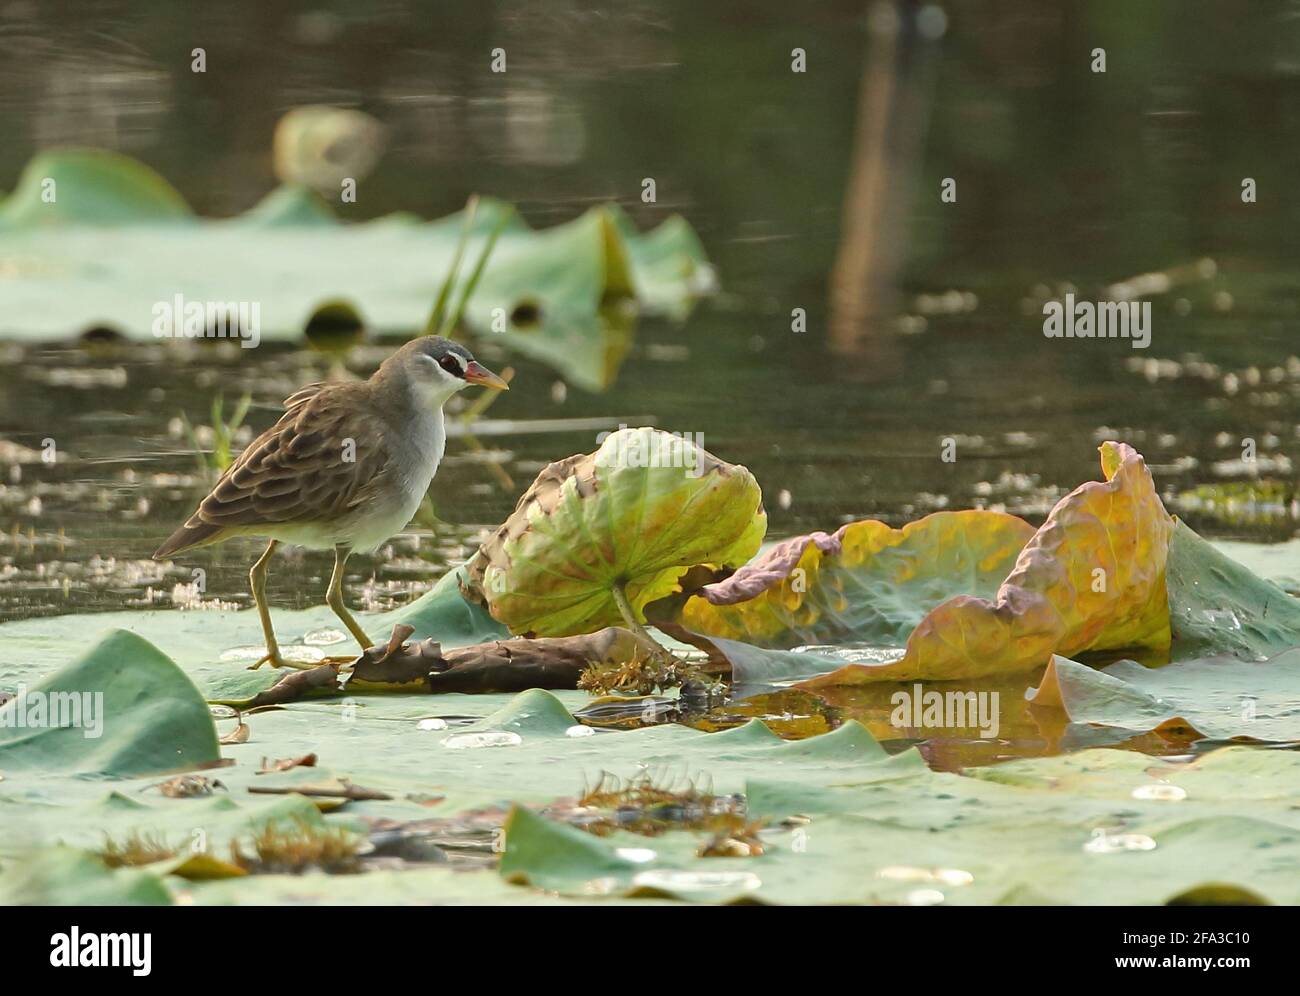 White-browed Crake (Amaurornis cinerea) adult walking on lilly pads Ang Trapaeng Thmor, Cambodia          January Stock Photo